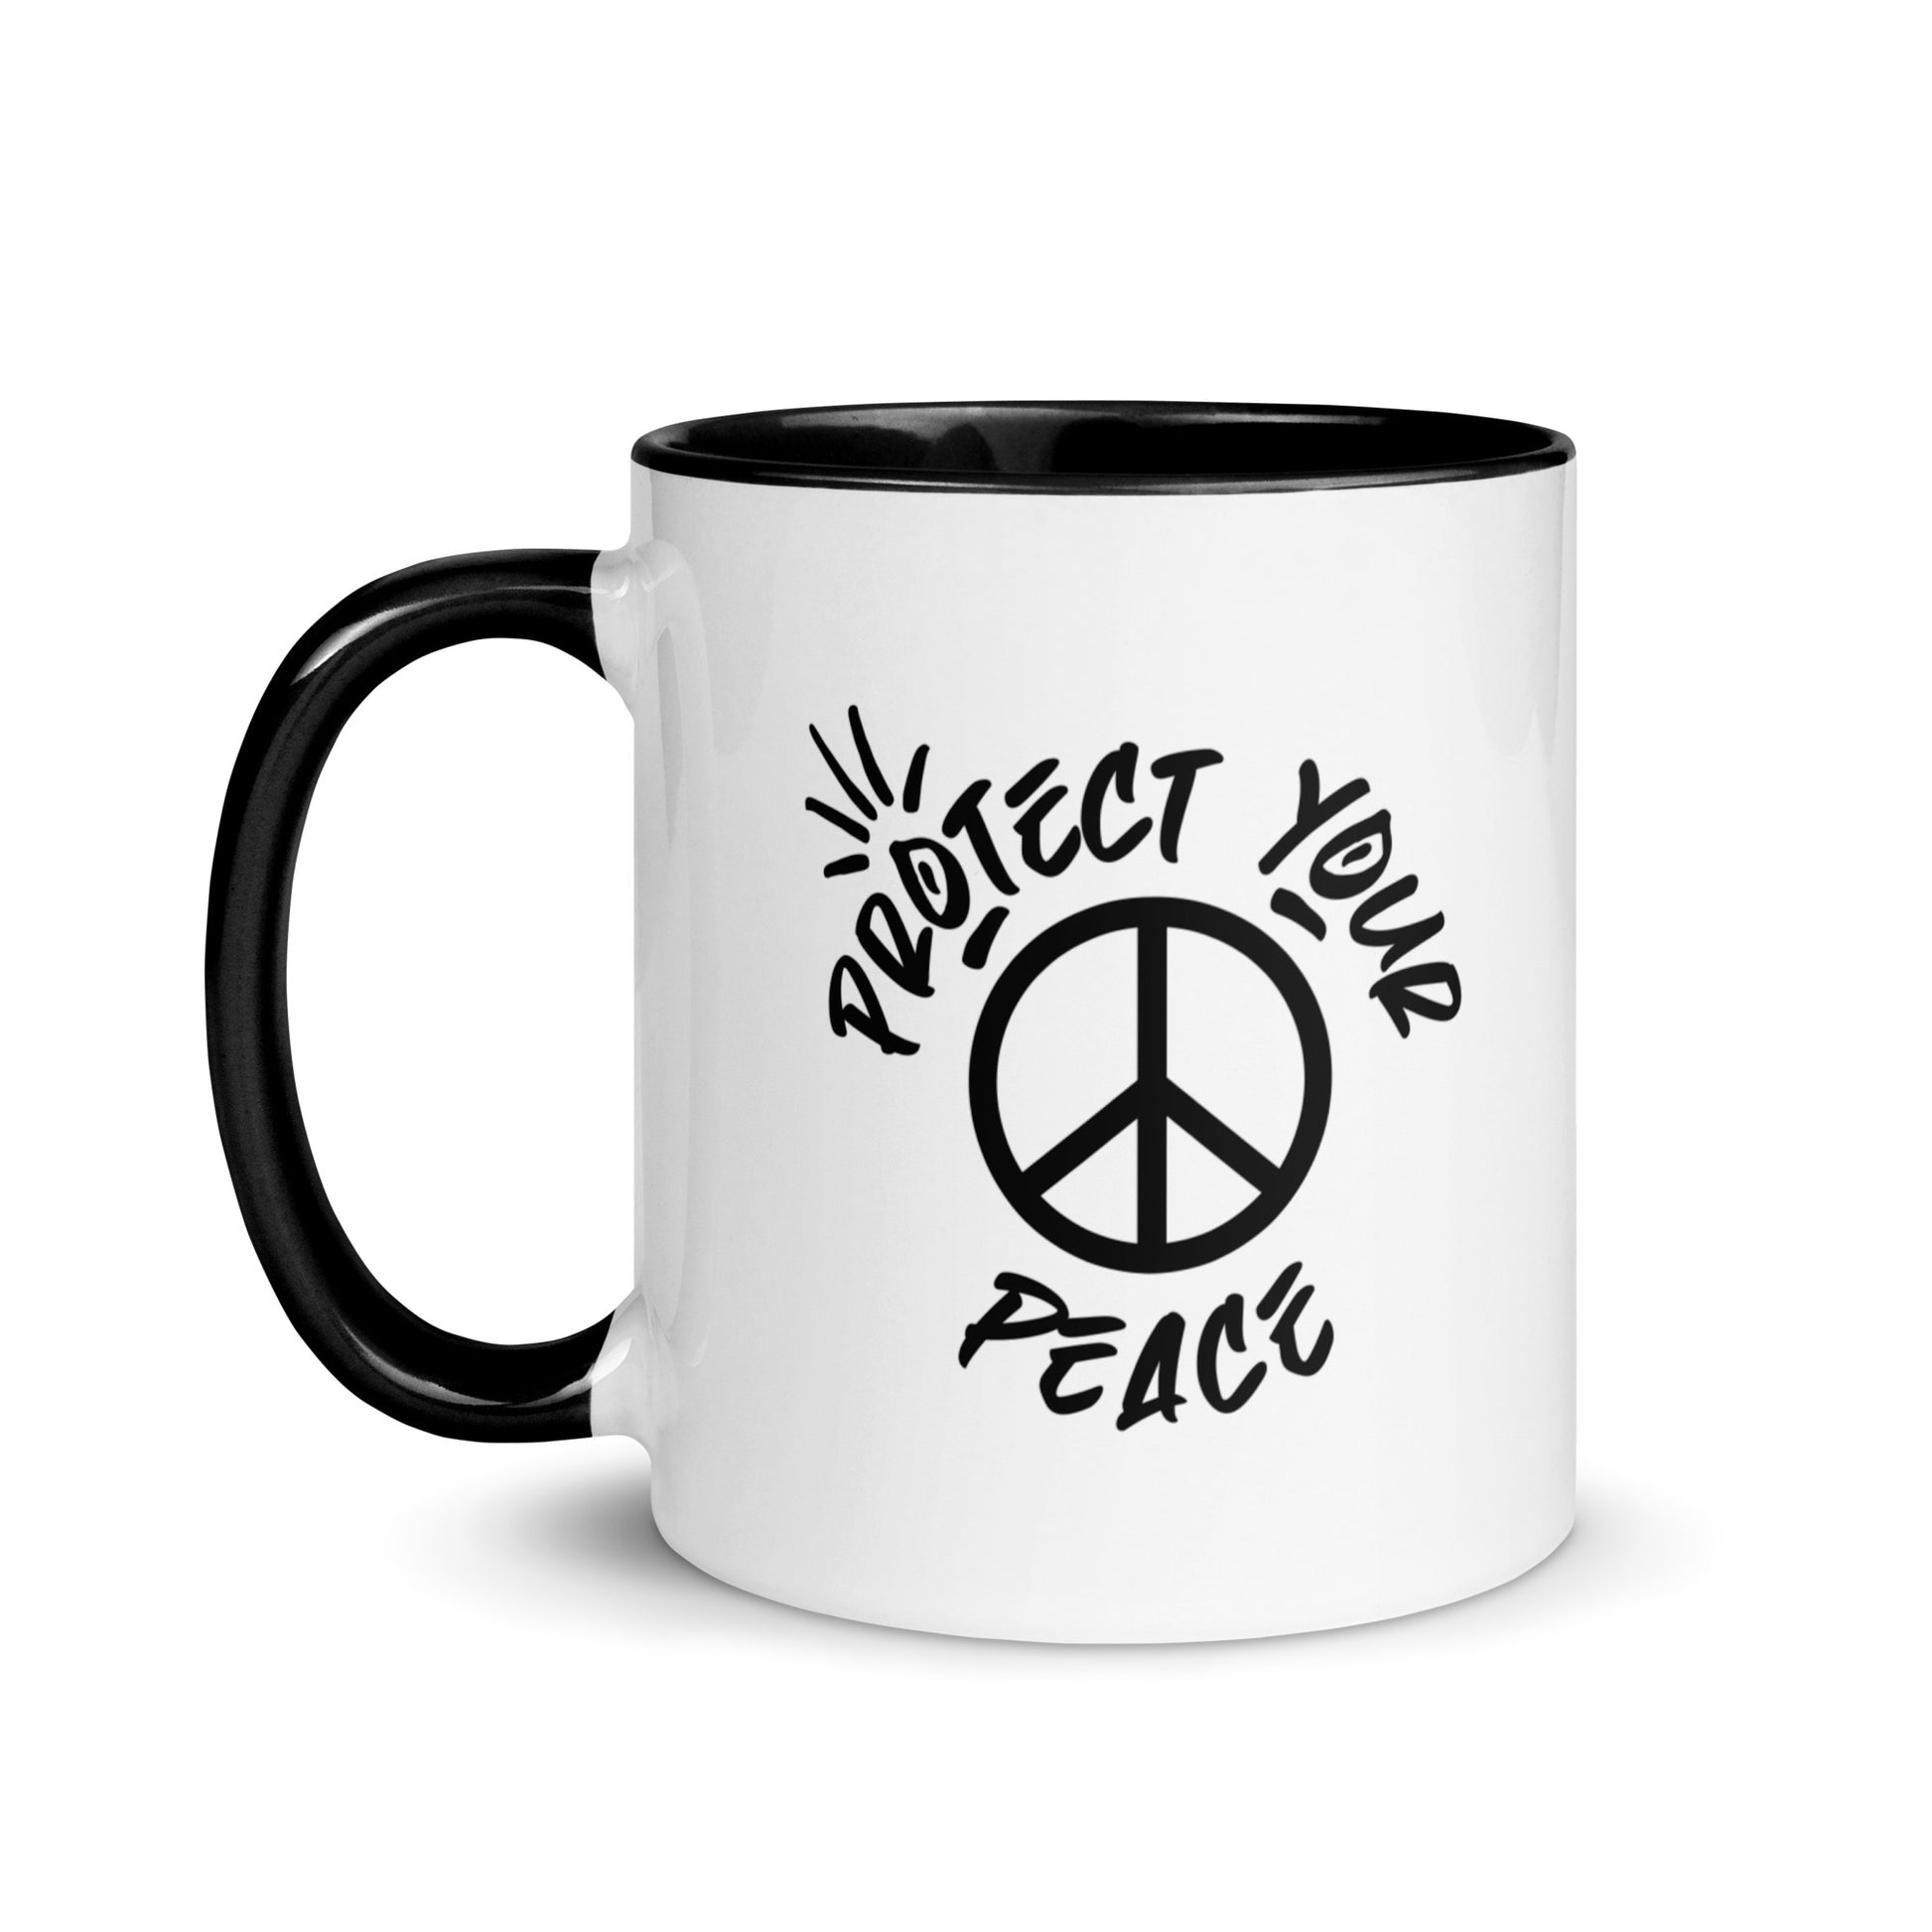 Sturdy 'Protect Your Peace Coffee Mug' bearing the uplifting message from Tribe of Weirdos, crafted to inspire tranquility with your morning coffee or evening tea.